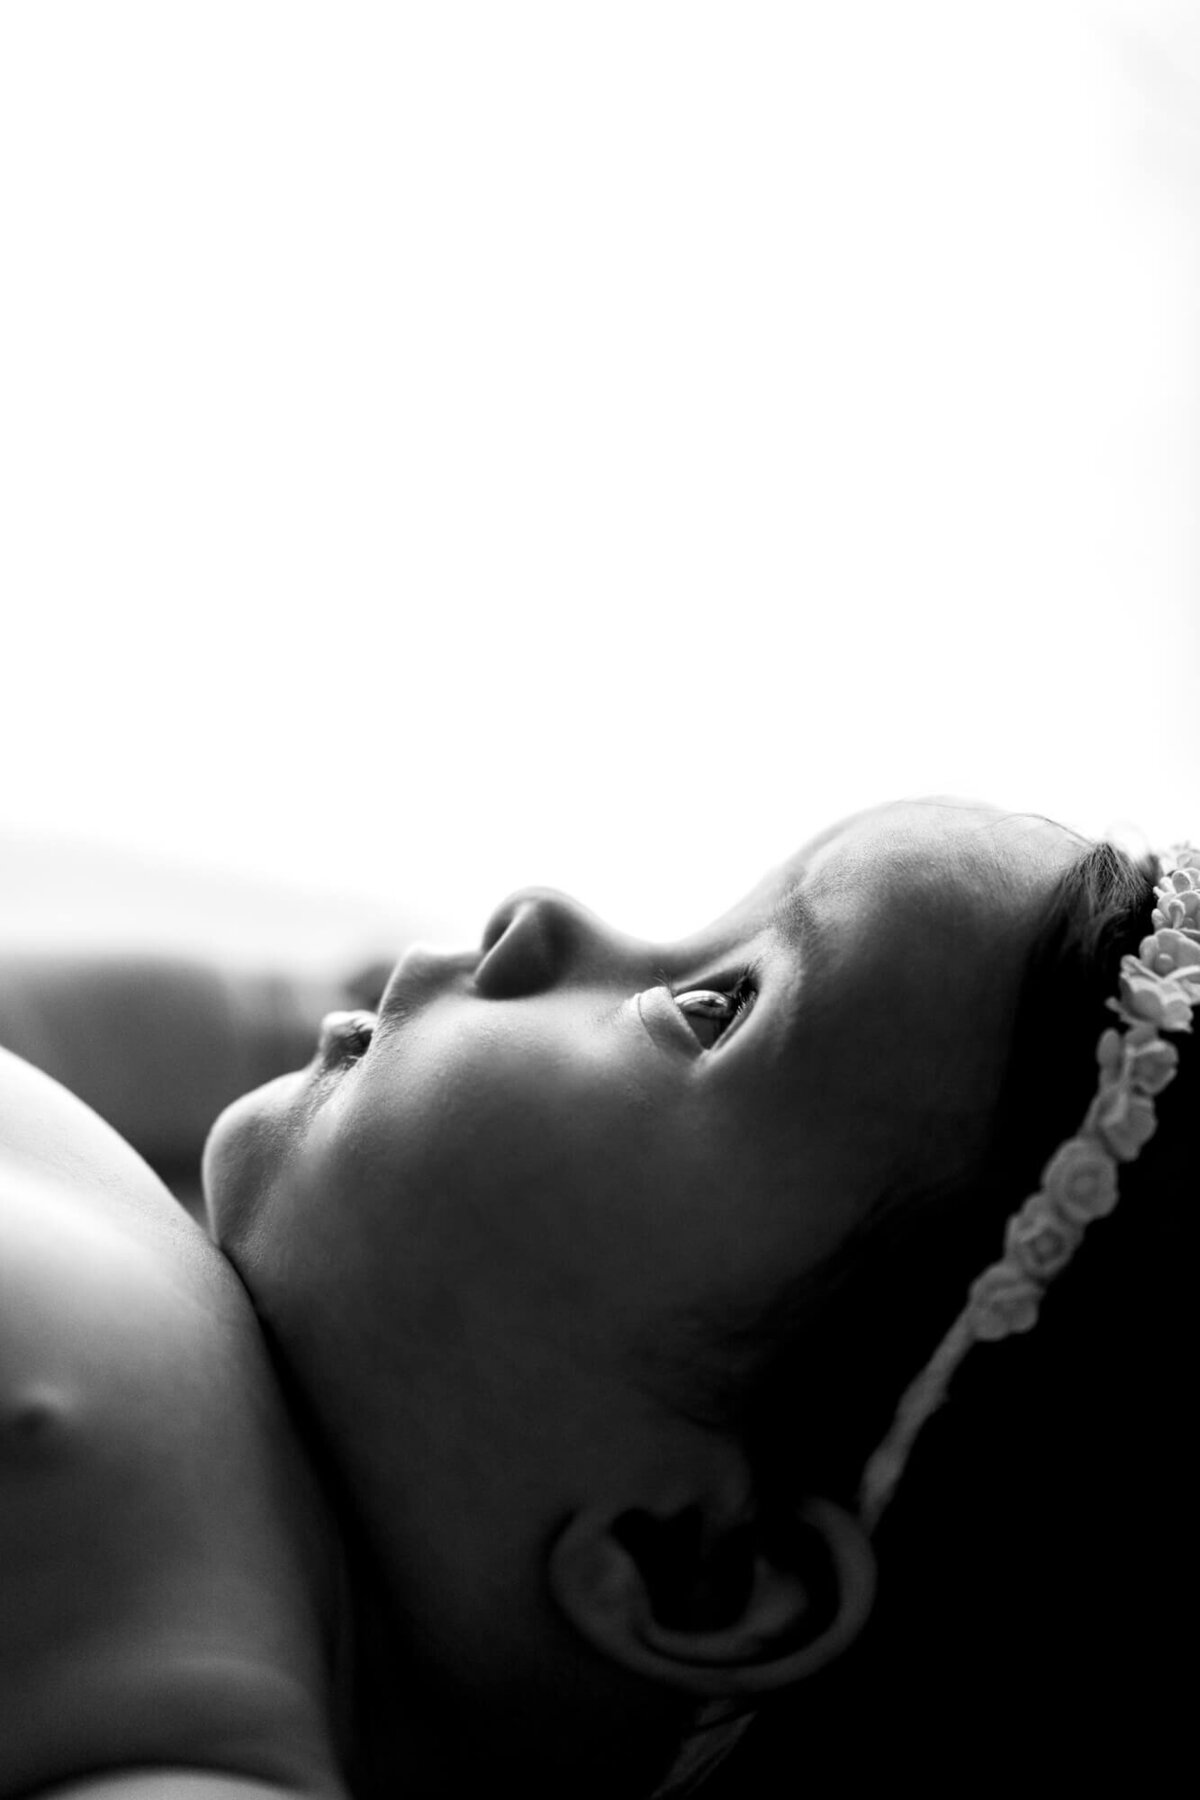 Black and white profile portrait of a baby girl wearing a floral headband laying down and looking up in and OKC studiio.